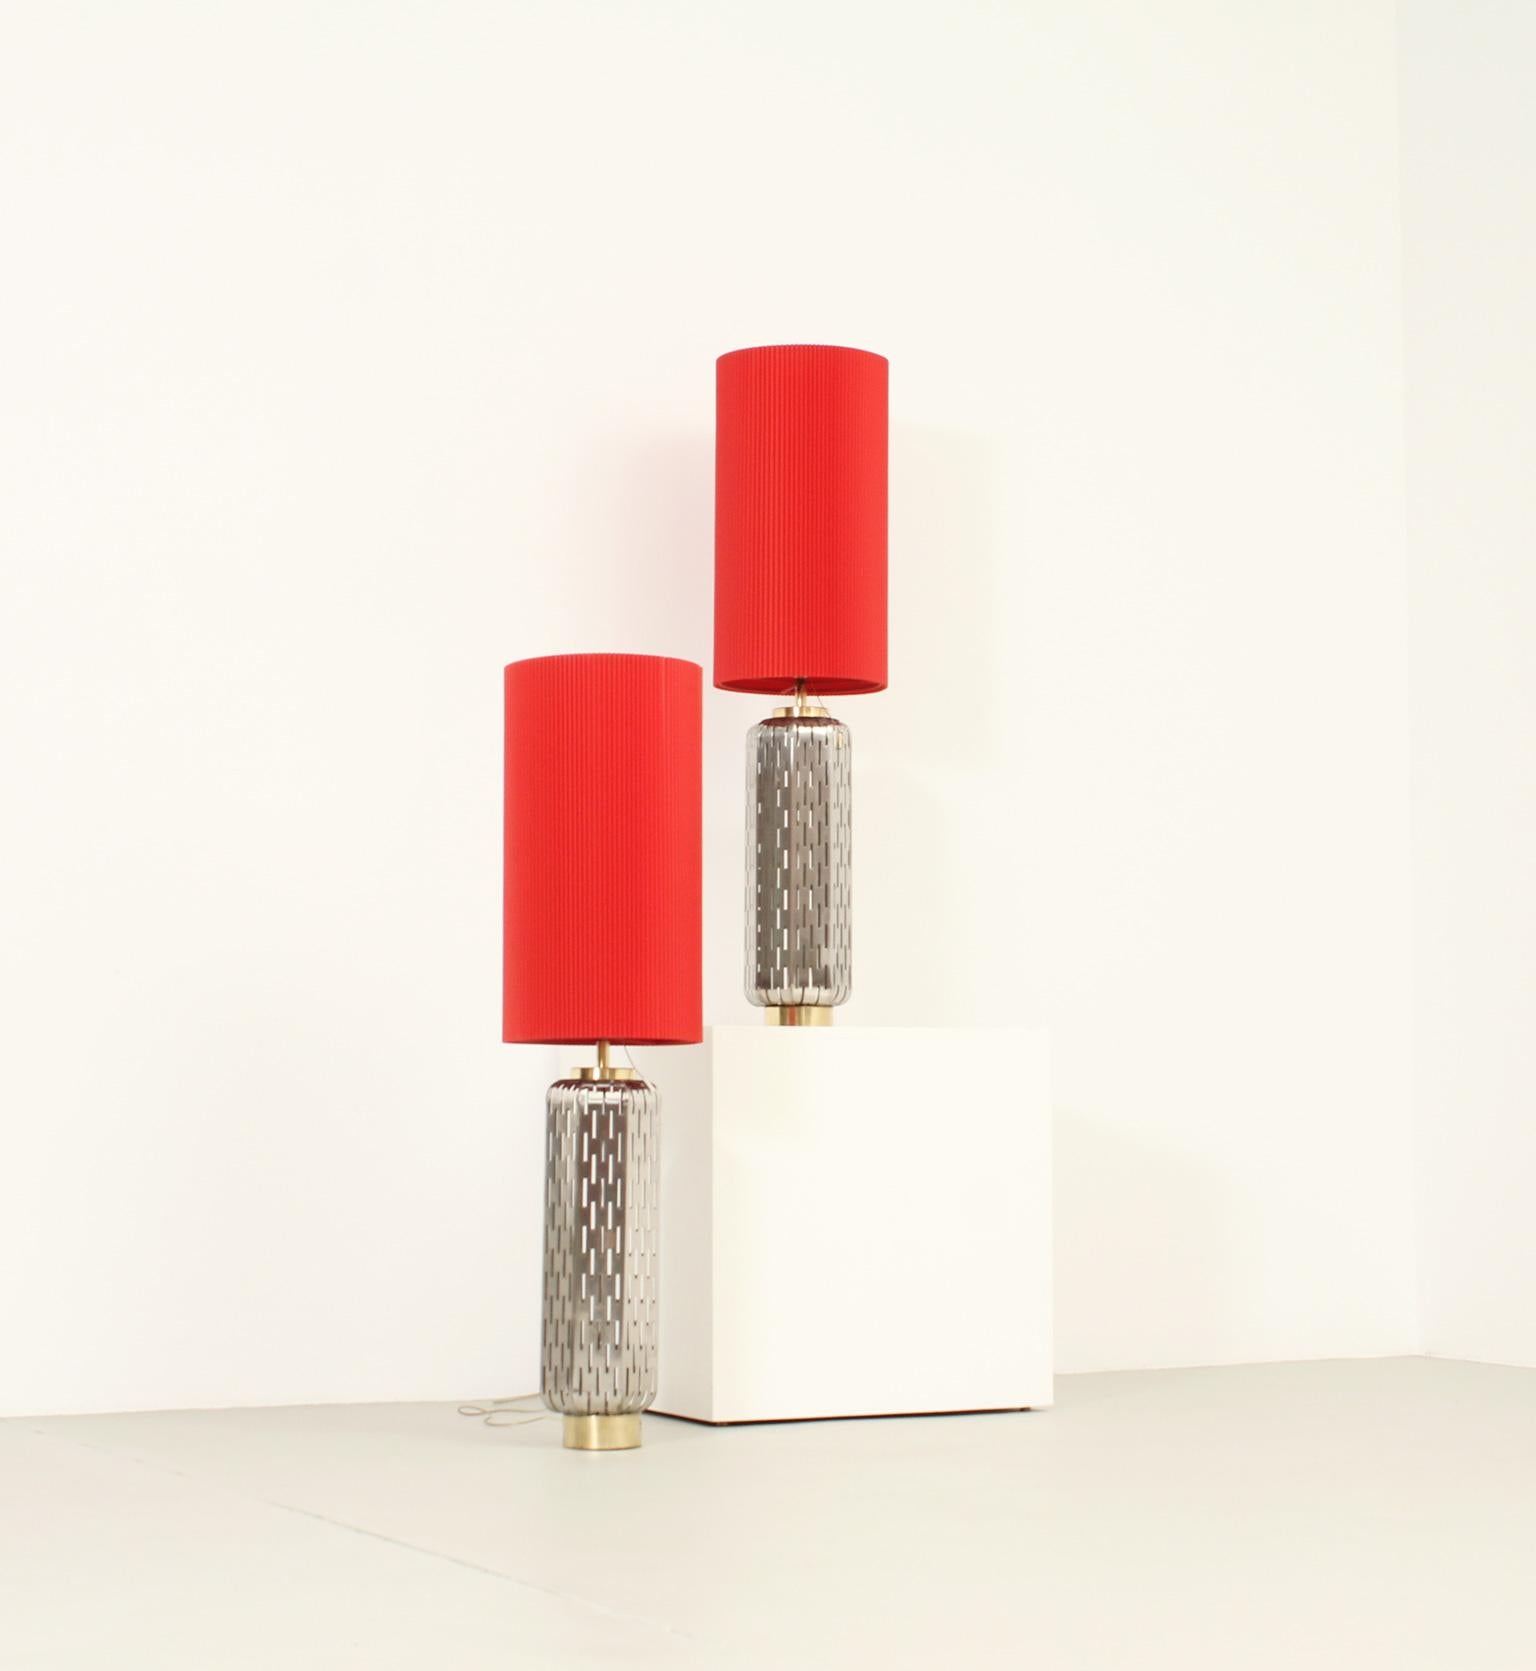 Pair of Large Table Lamps in Perforated Steel, Spain, 1960's For Sale 6